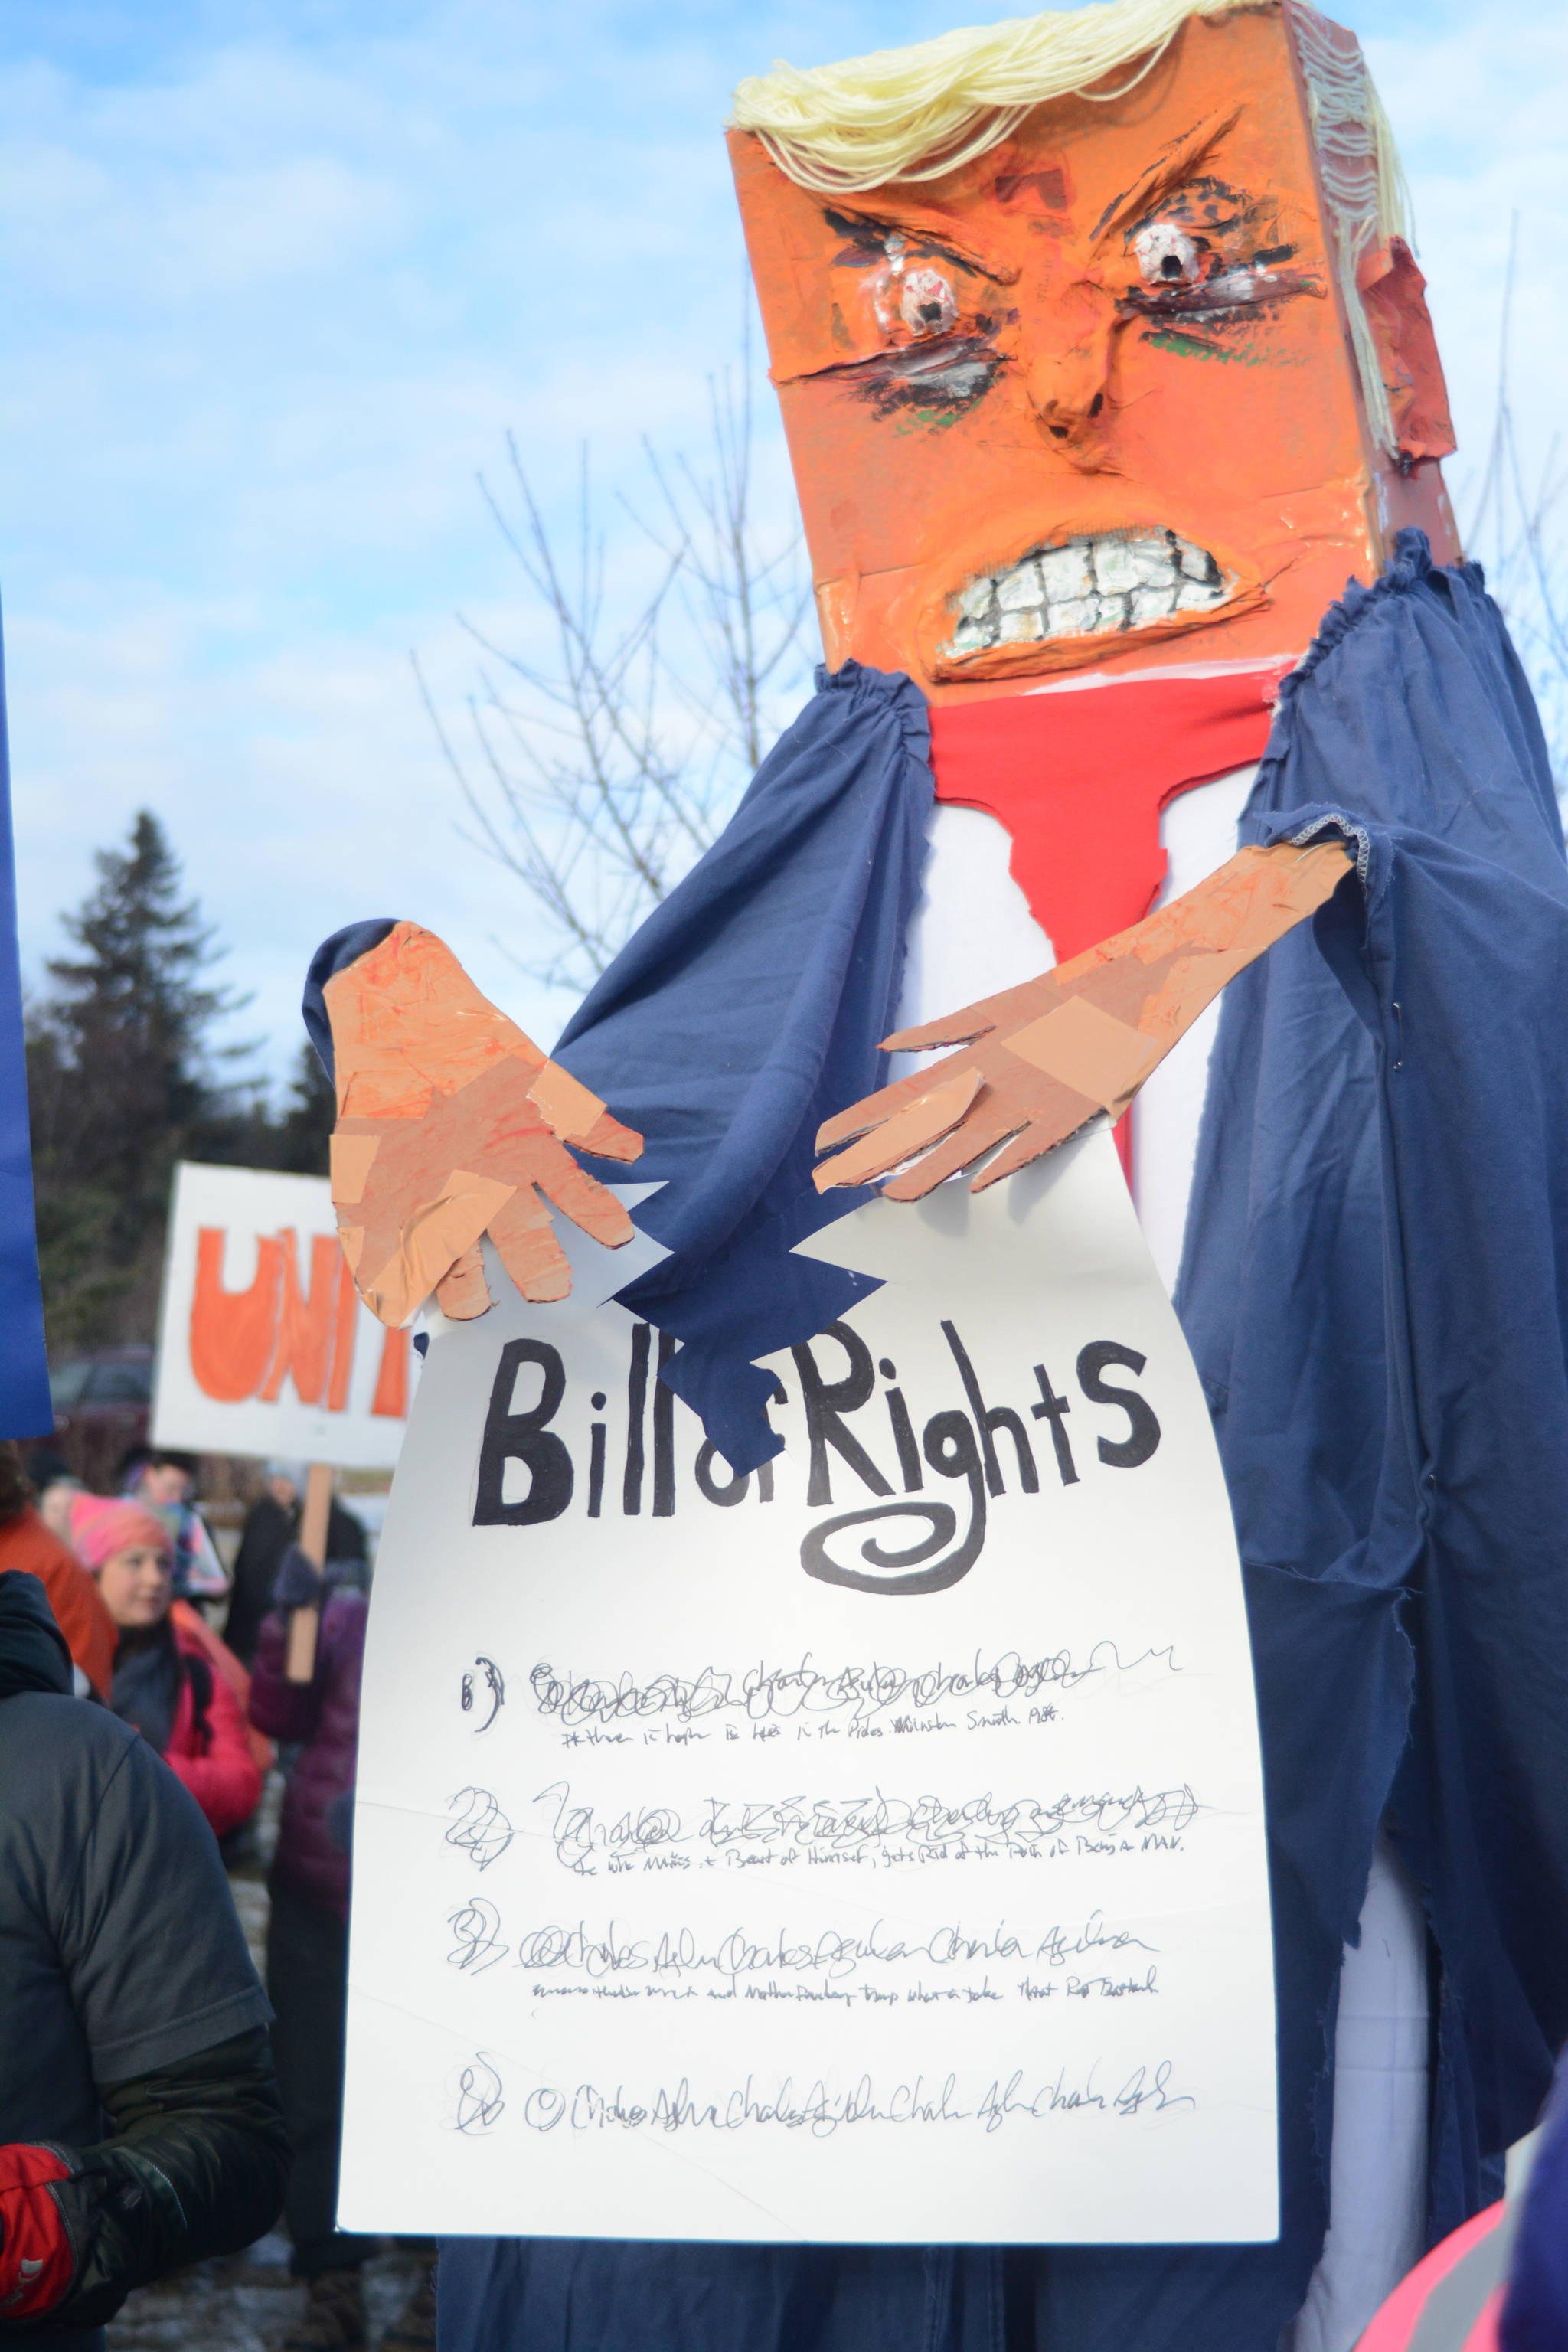 A President Donald Trump puppet shreds the Bill of Rights in the Homer March for Women on Saturday. About 700 people walked in the march along Pioneer Avenue on Jan. 20, 2018, in Homer, Alaska. The line of marchers extended from Main Street to Kachemak Way. (Photo by Michael Armstrong/Homer News)